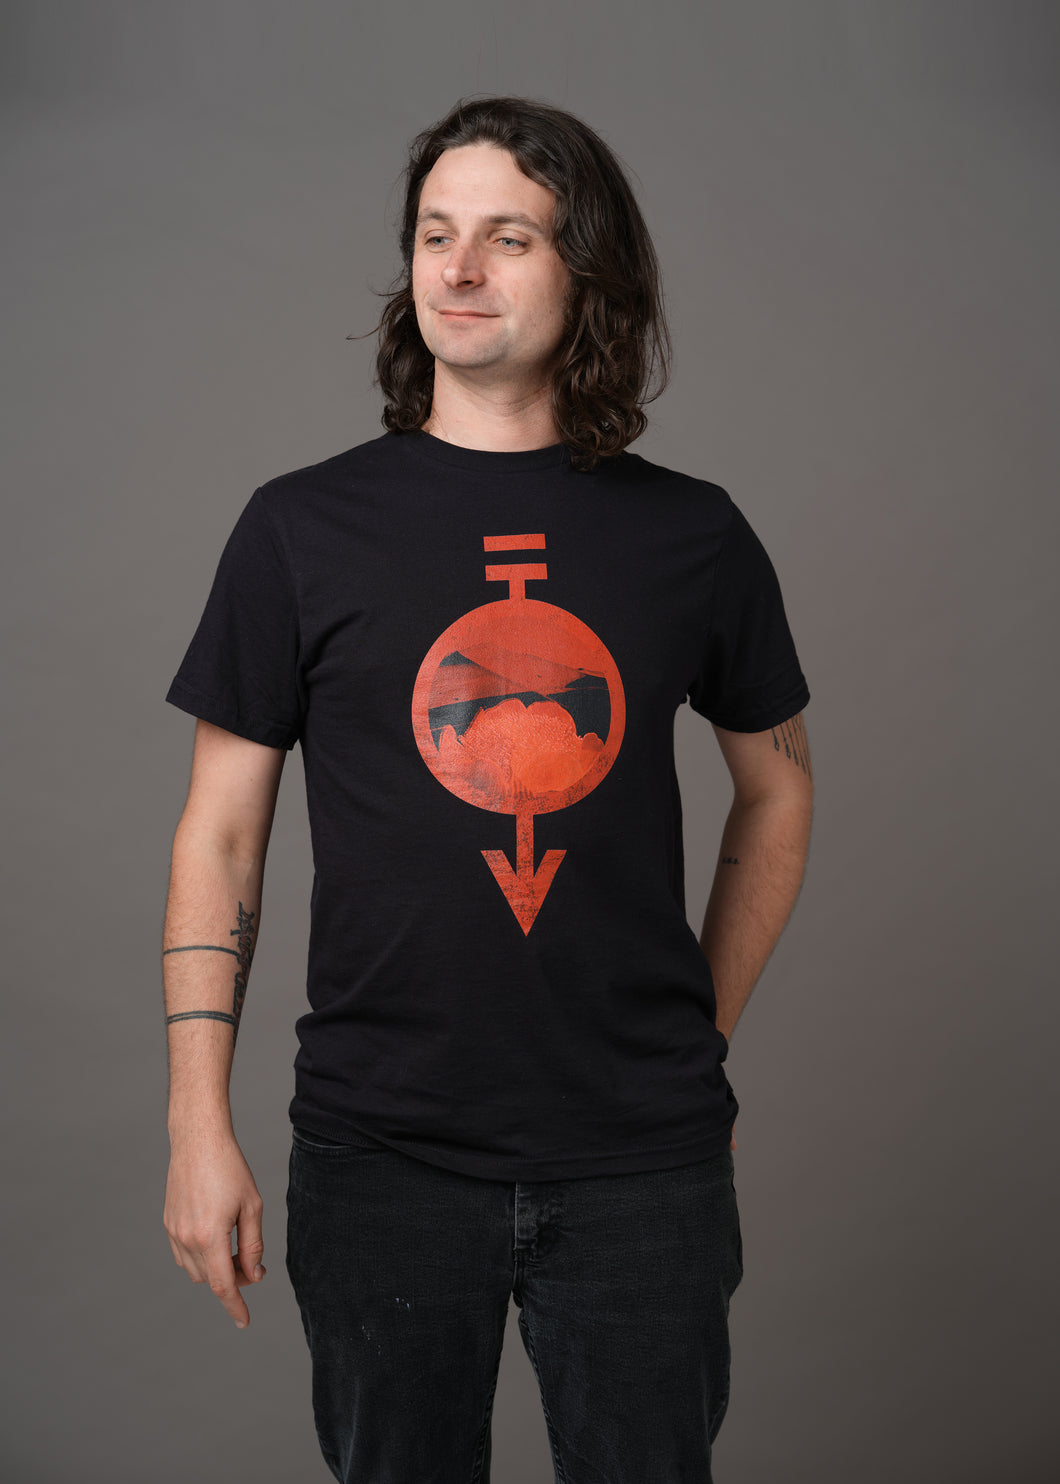 Black shirt featuring the Red Haemanthus flower inside the Red sigil 